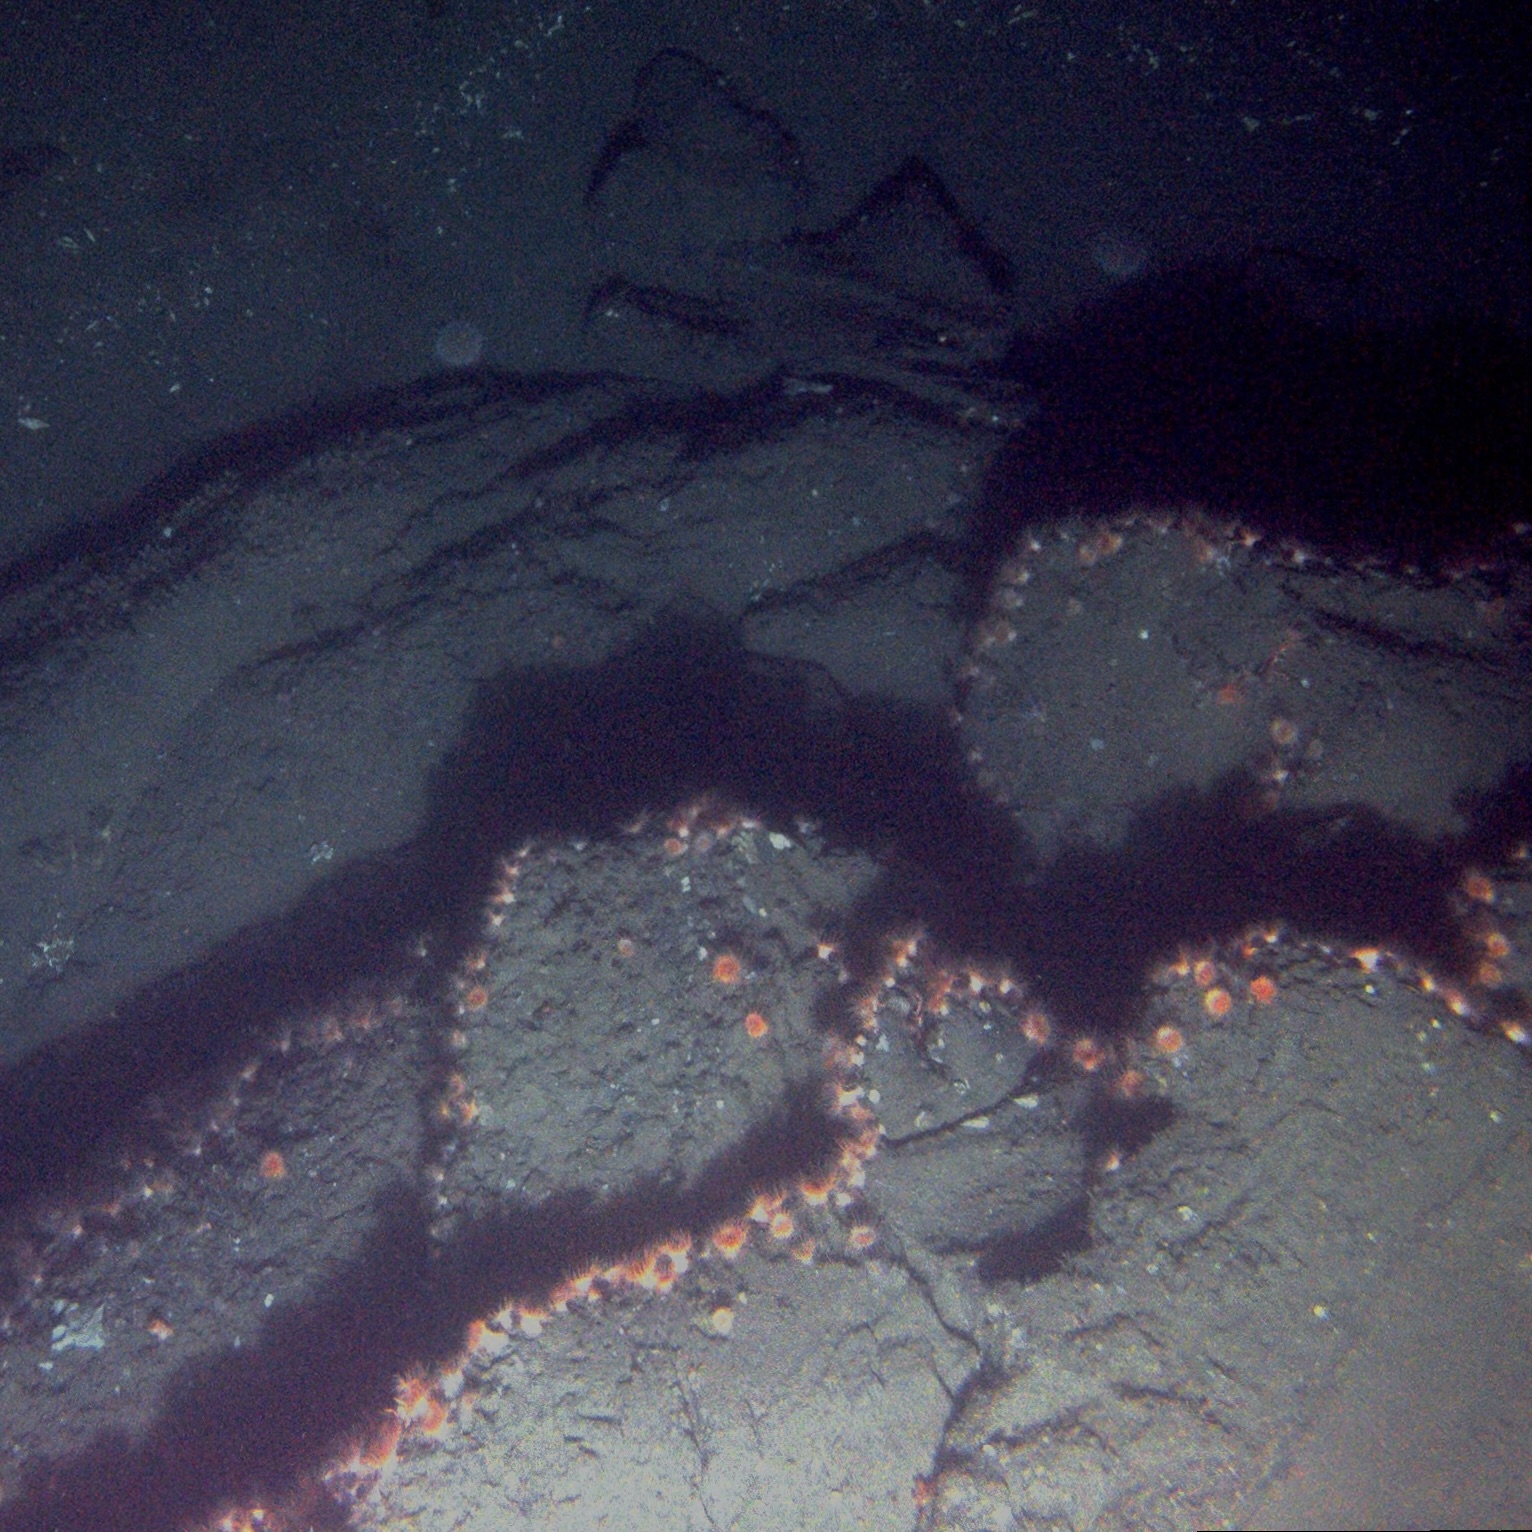 The darkness of the ocean floor, with minor spots of orange visible in the dim light